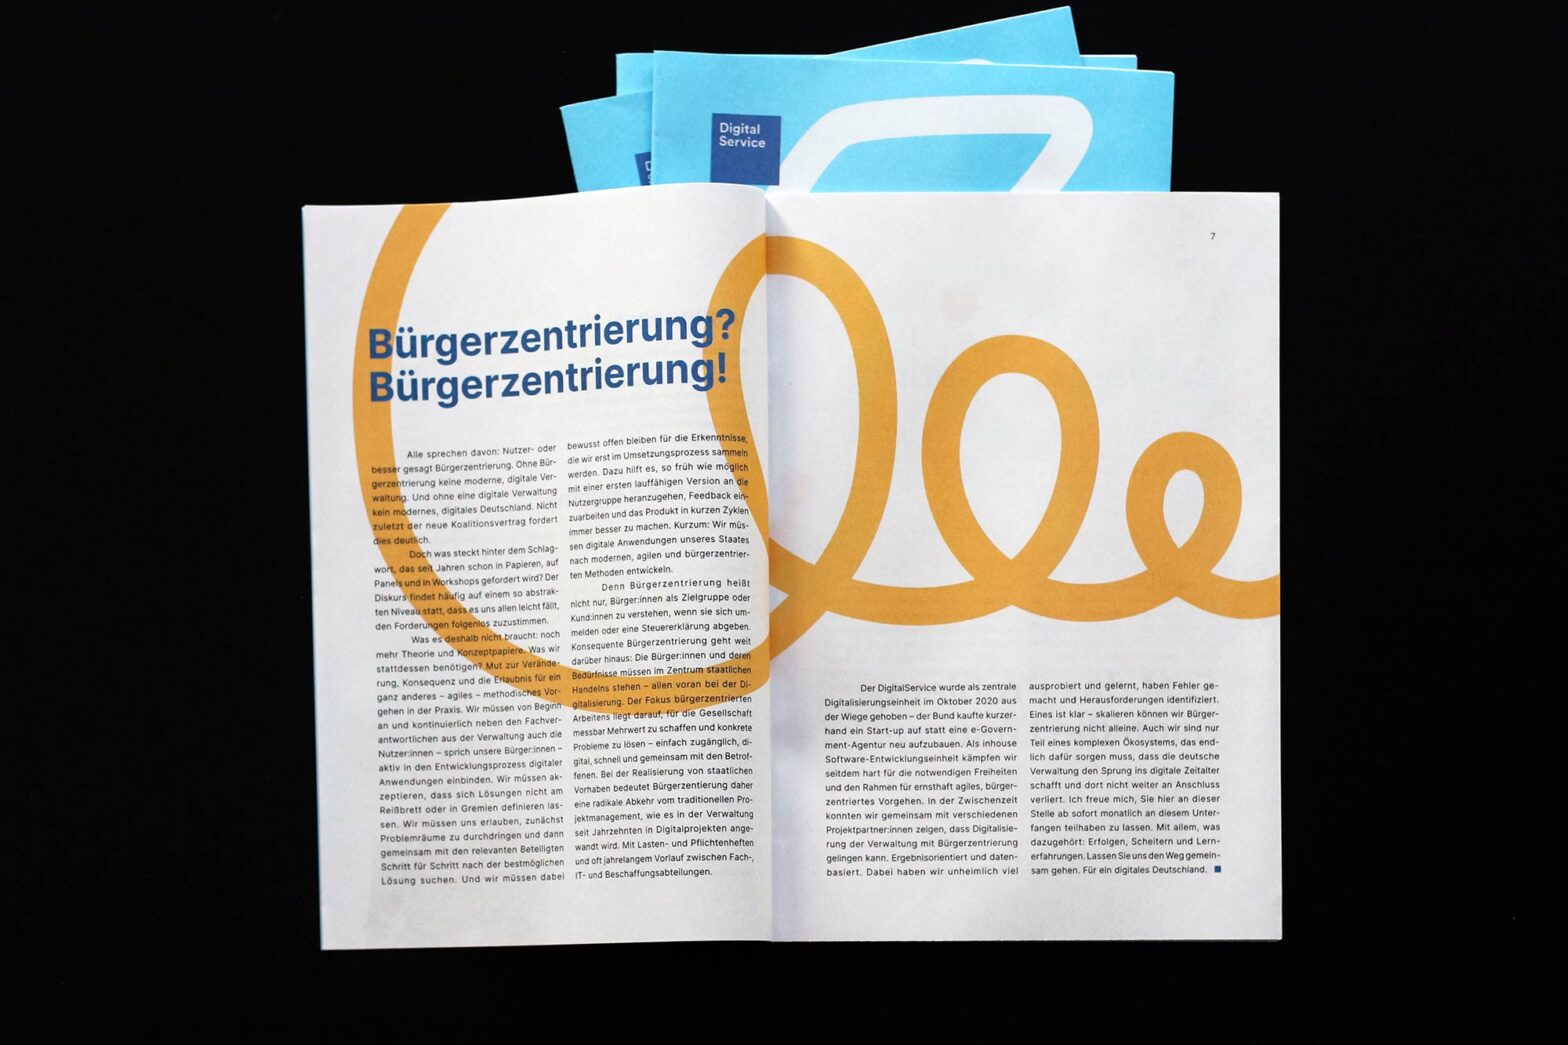 An open booklet with a lot of text, a headline and a curly line in the background. The headline says “Citizen-centricity? Citizen-centricity!” in German. Behind are further booklets piled up revealing a square logo that says “Digital Service”.